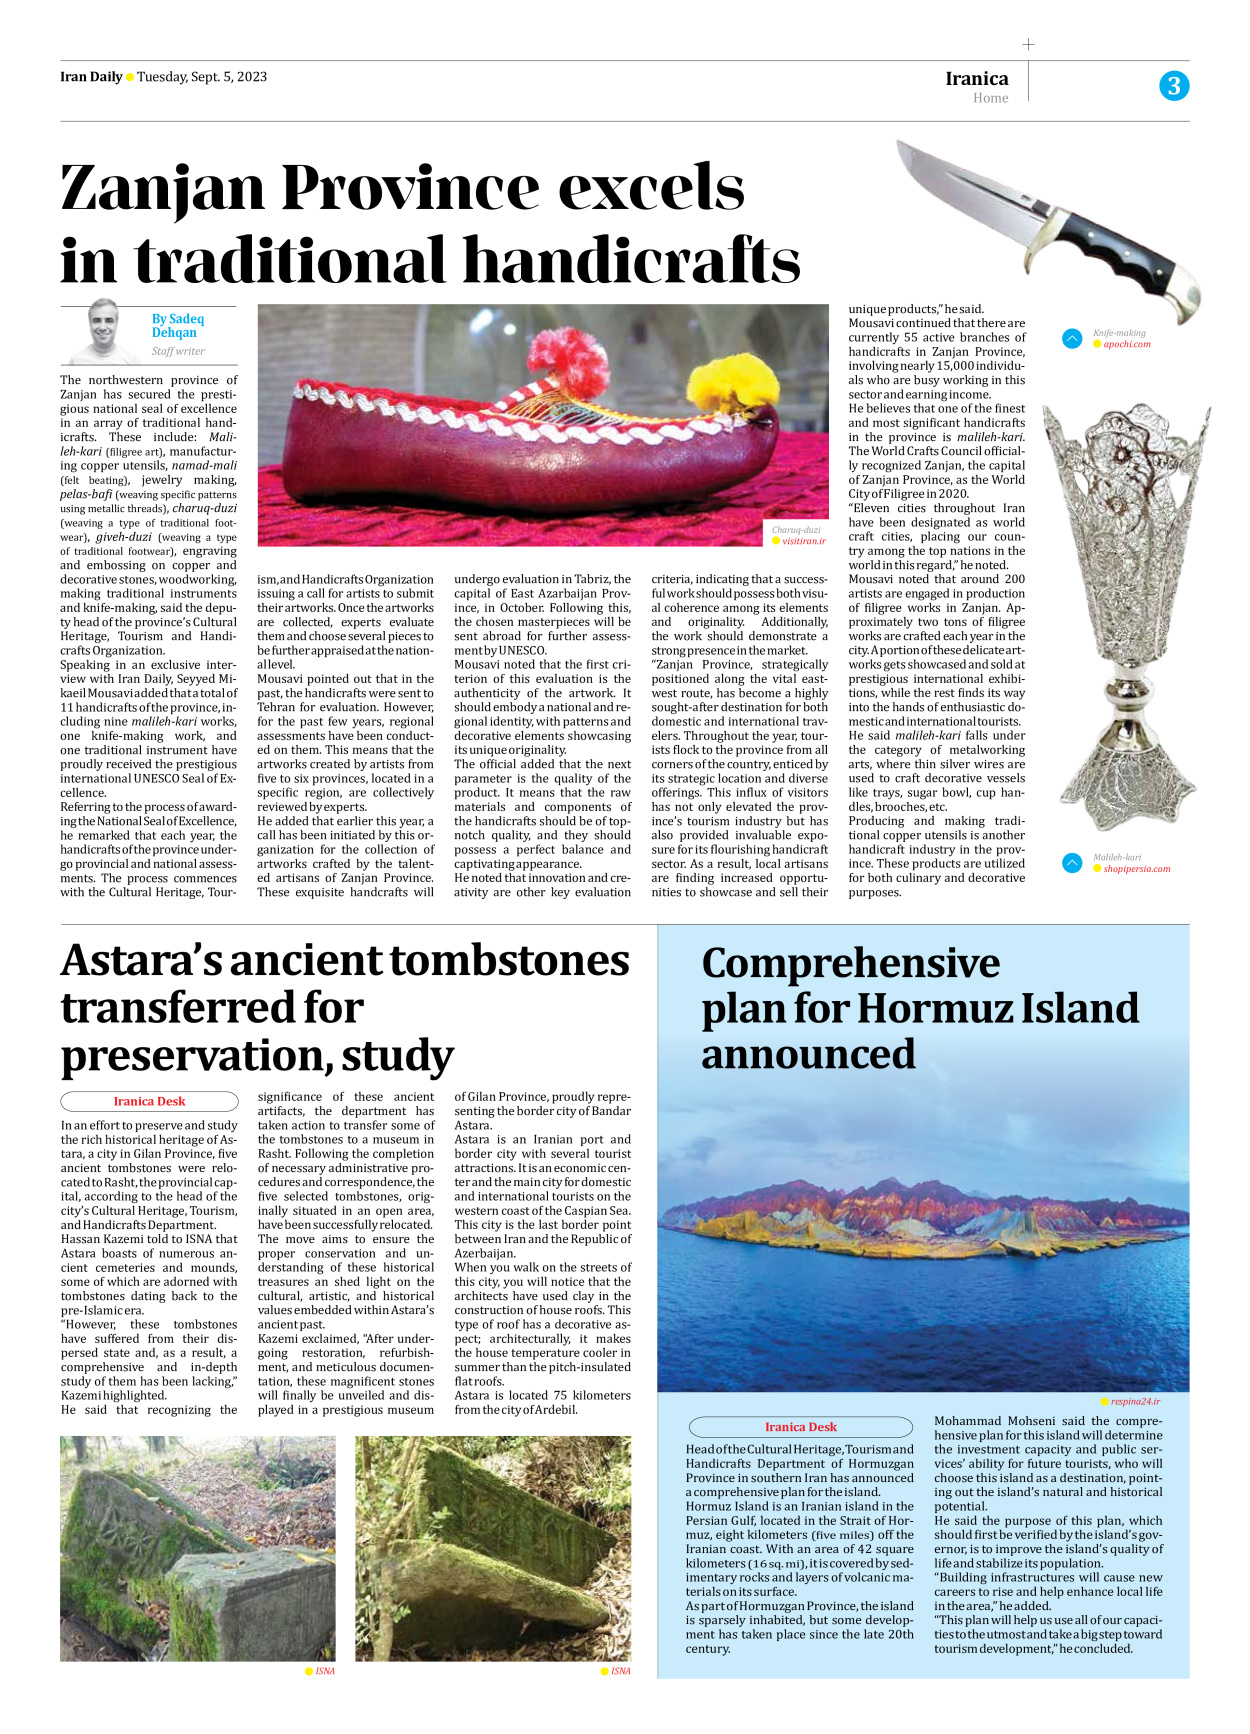 Iran Daily - Number Seven Thousand Three Hundred and Eighty One - 05 September 2023 - Page 3